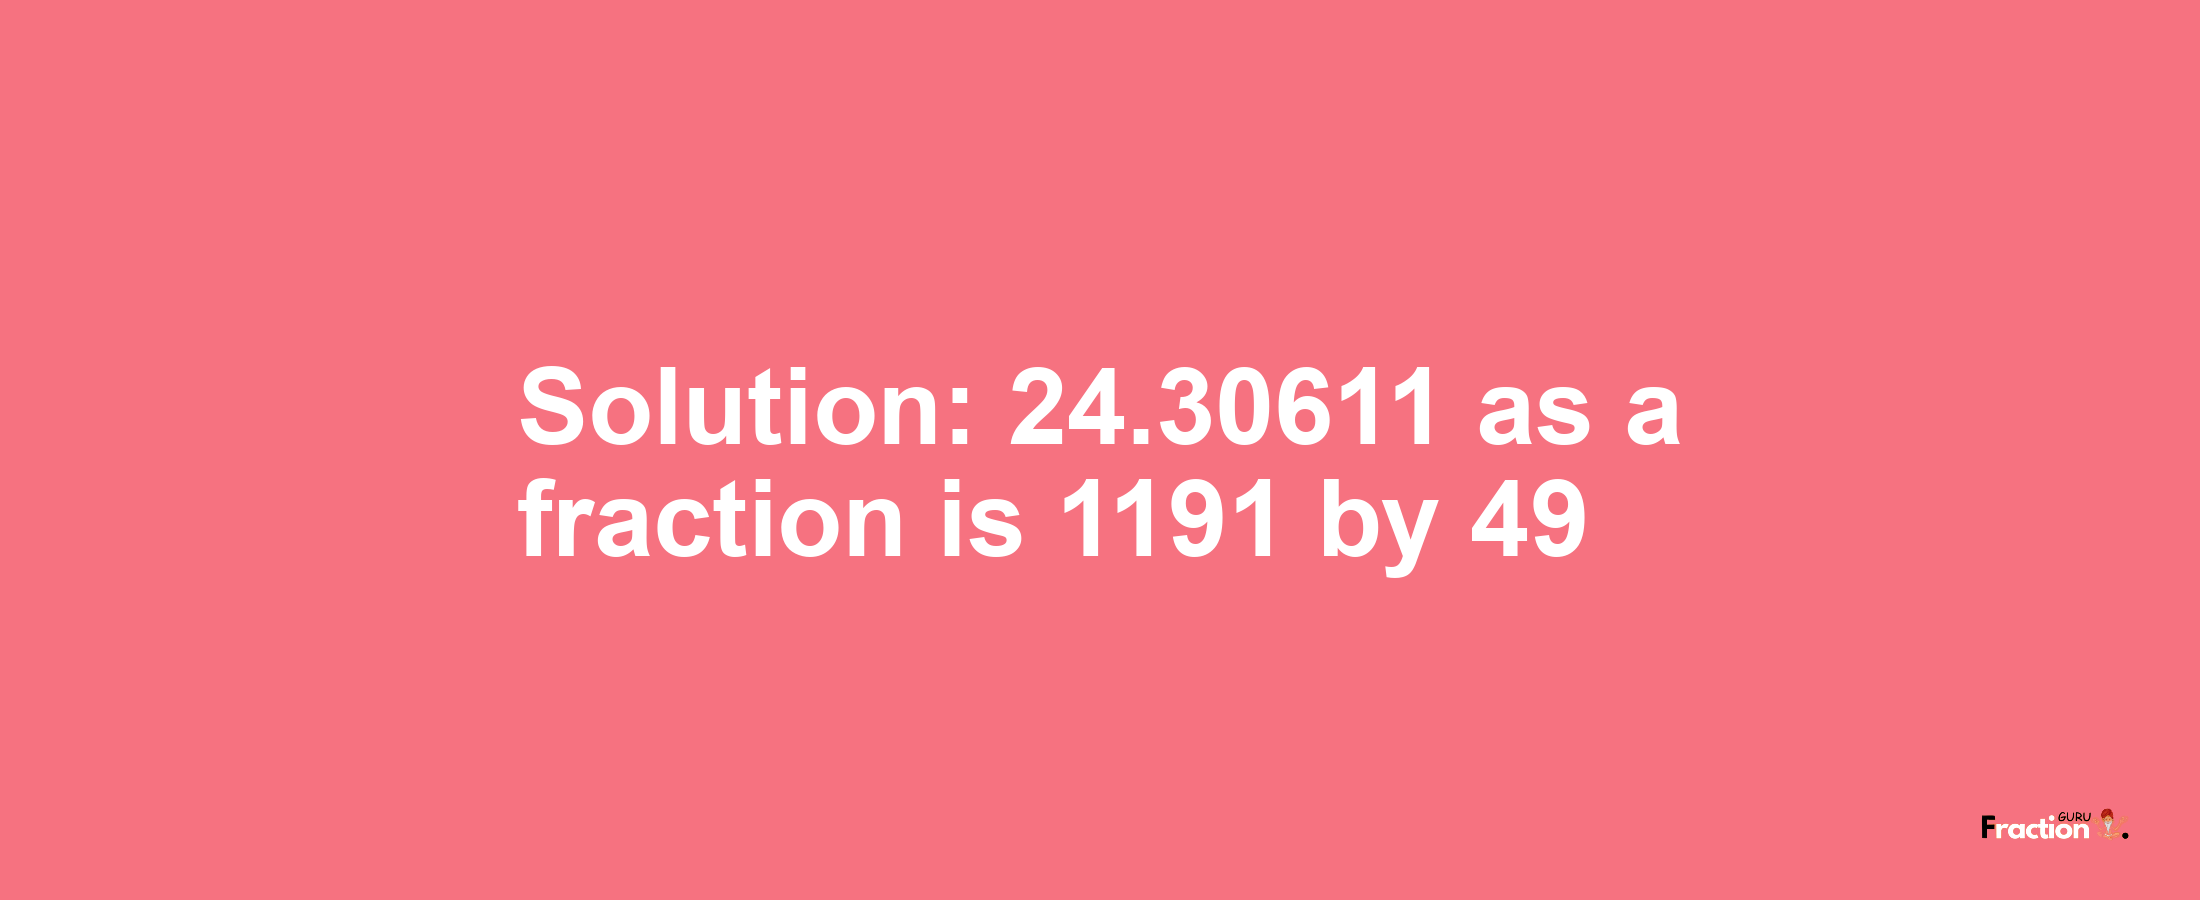 Solution:24.30611 as a fraction is 1191/49